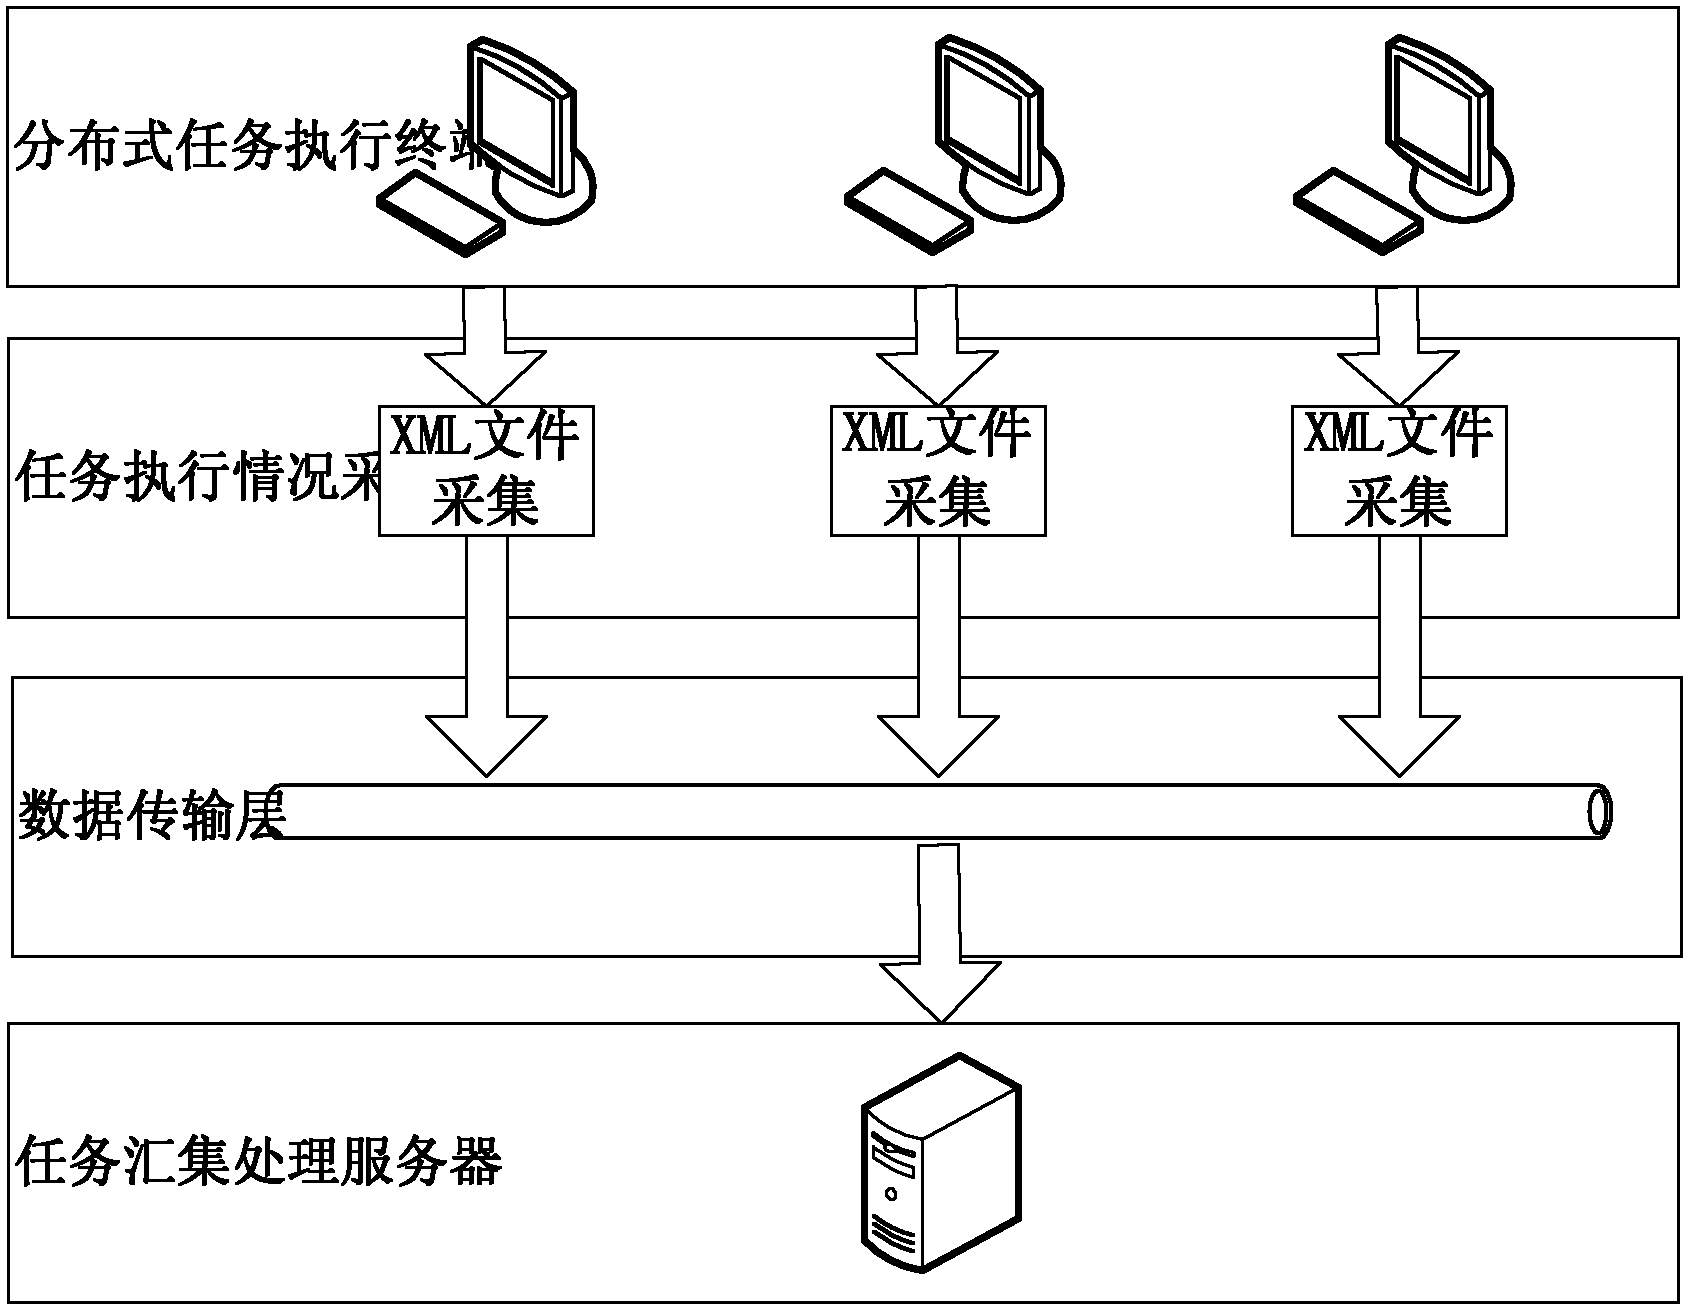 Multitask process monitoring method and system in distributed system environment